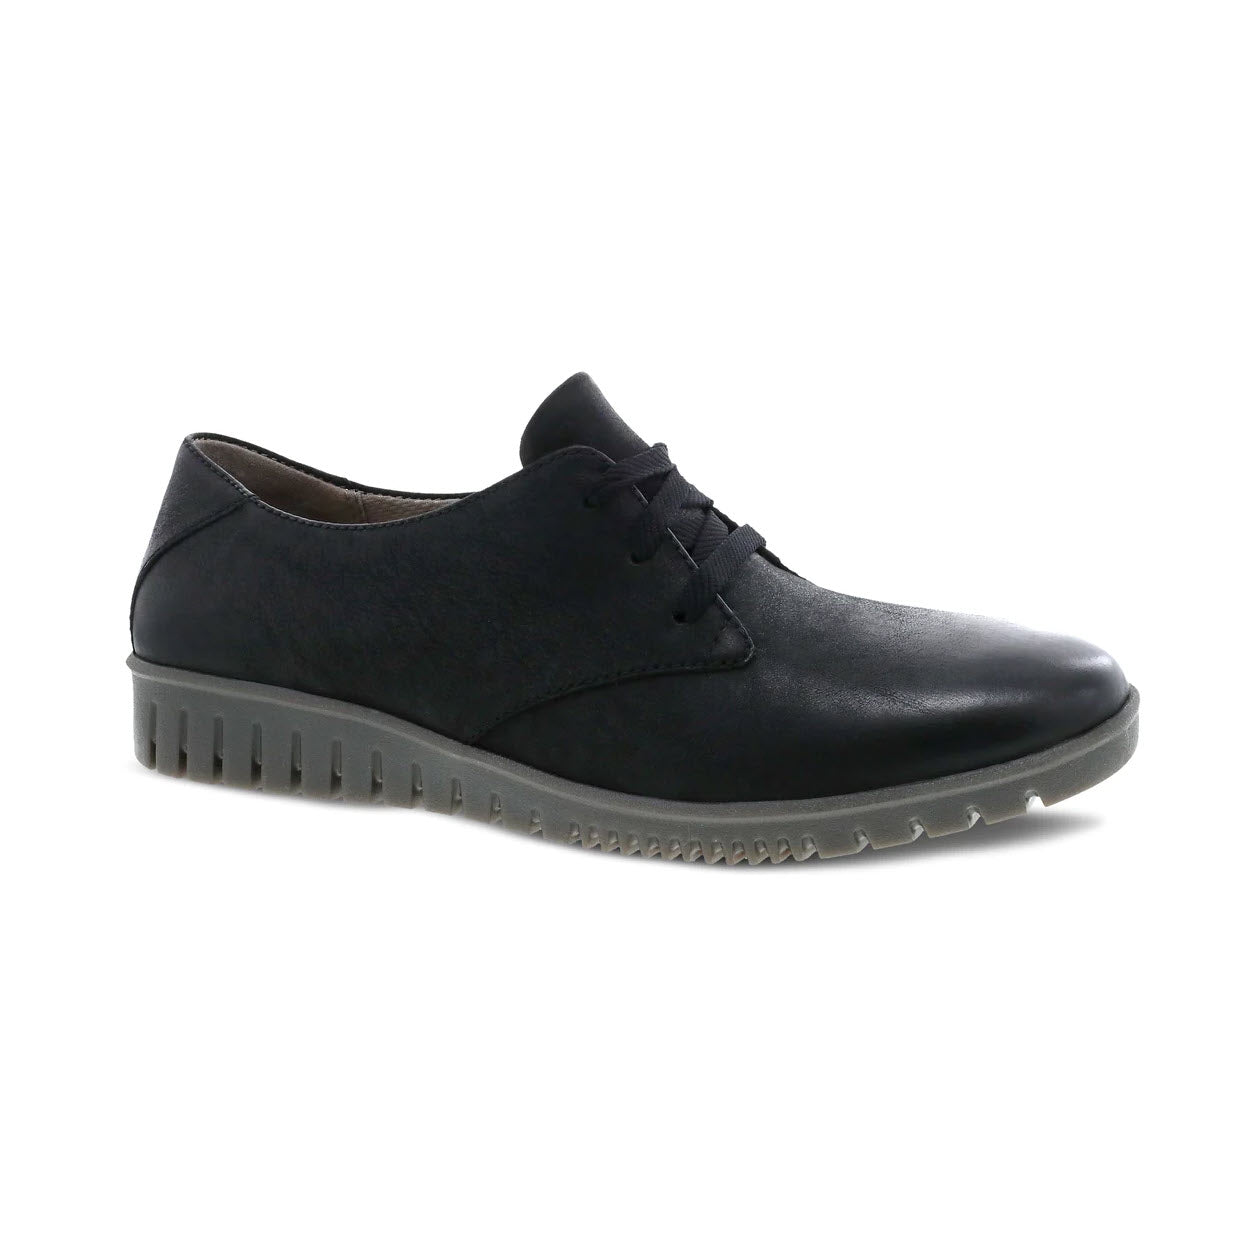 A Dansko Libbie black burnished Oxford shoe with laces and a distinctive ridged sole, isolated on a white background.